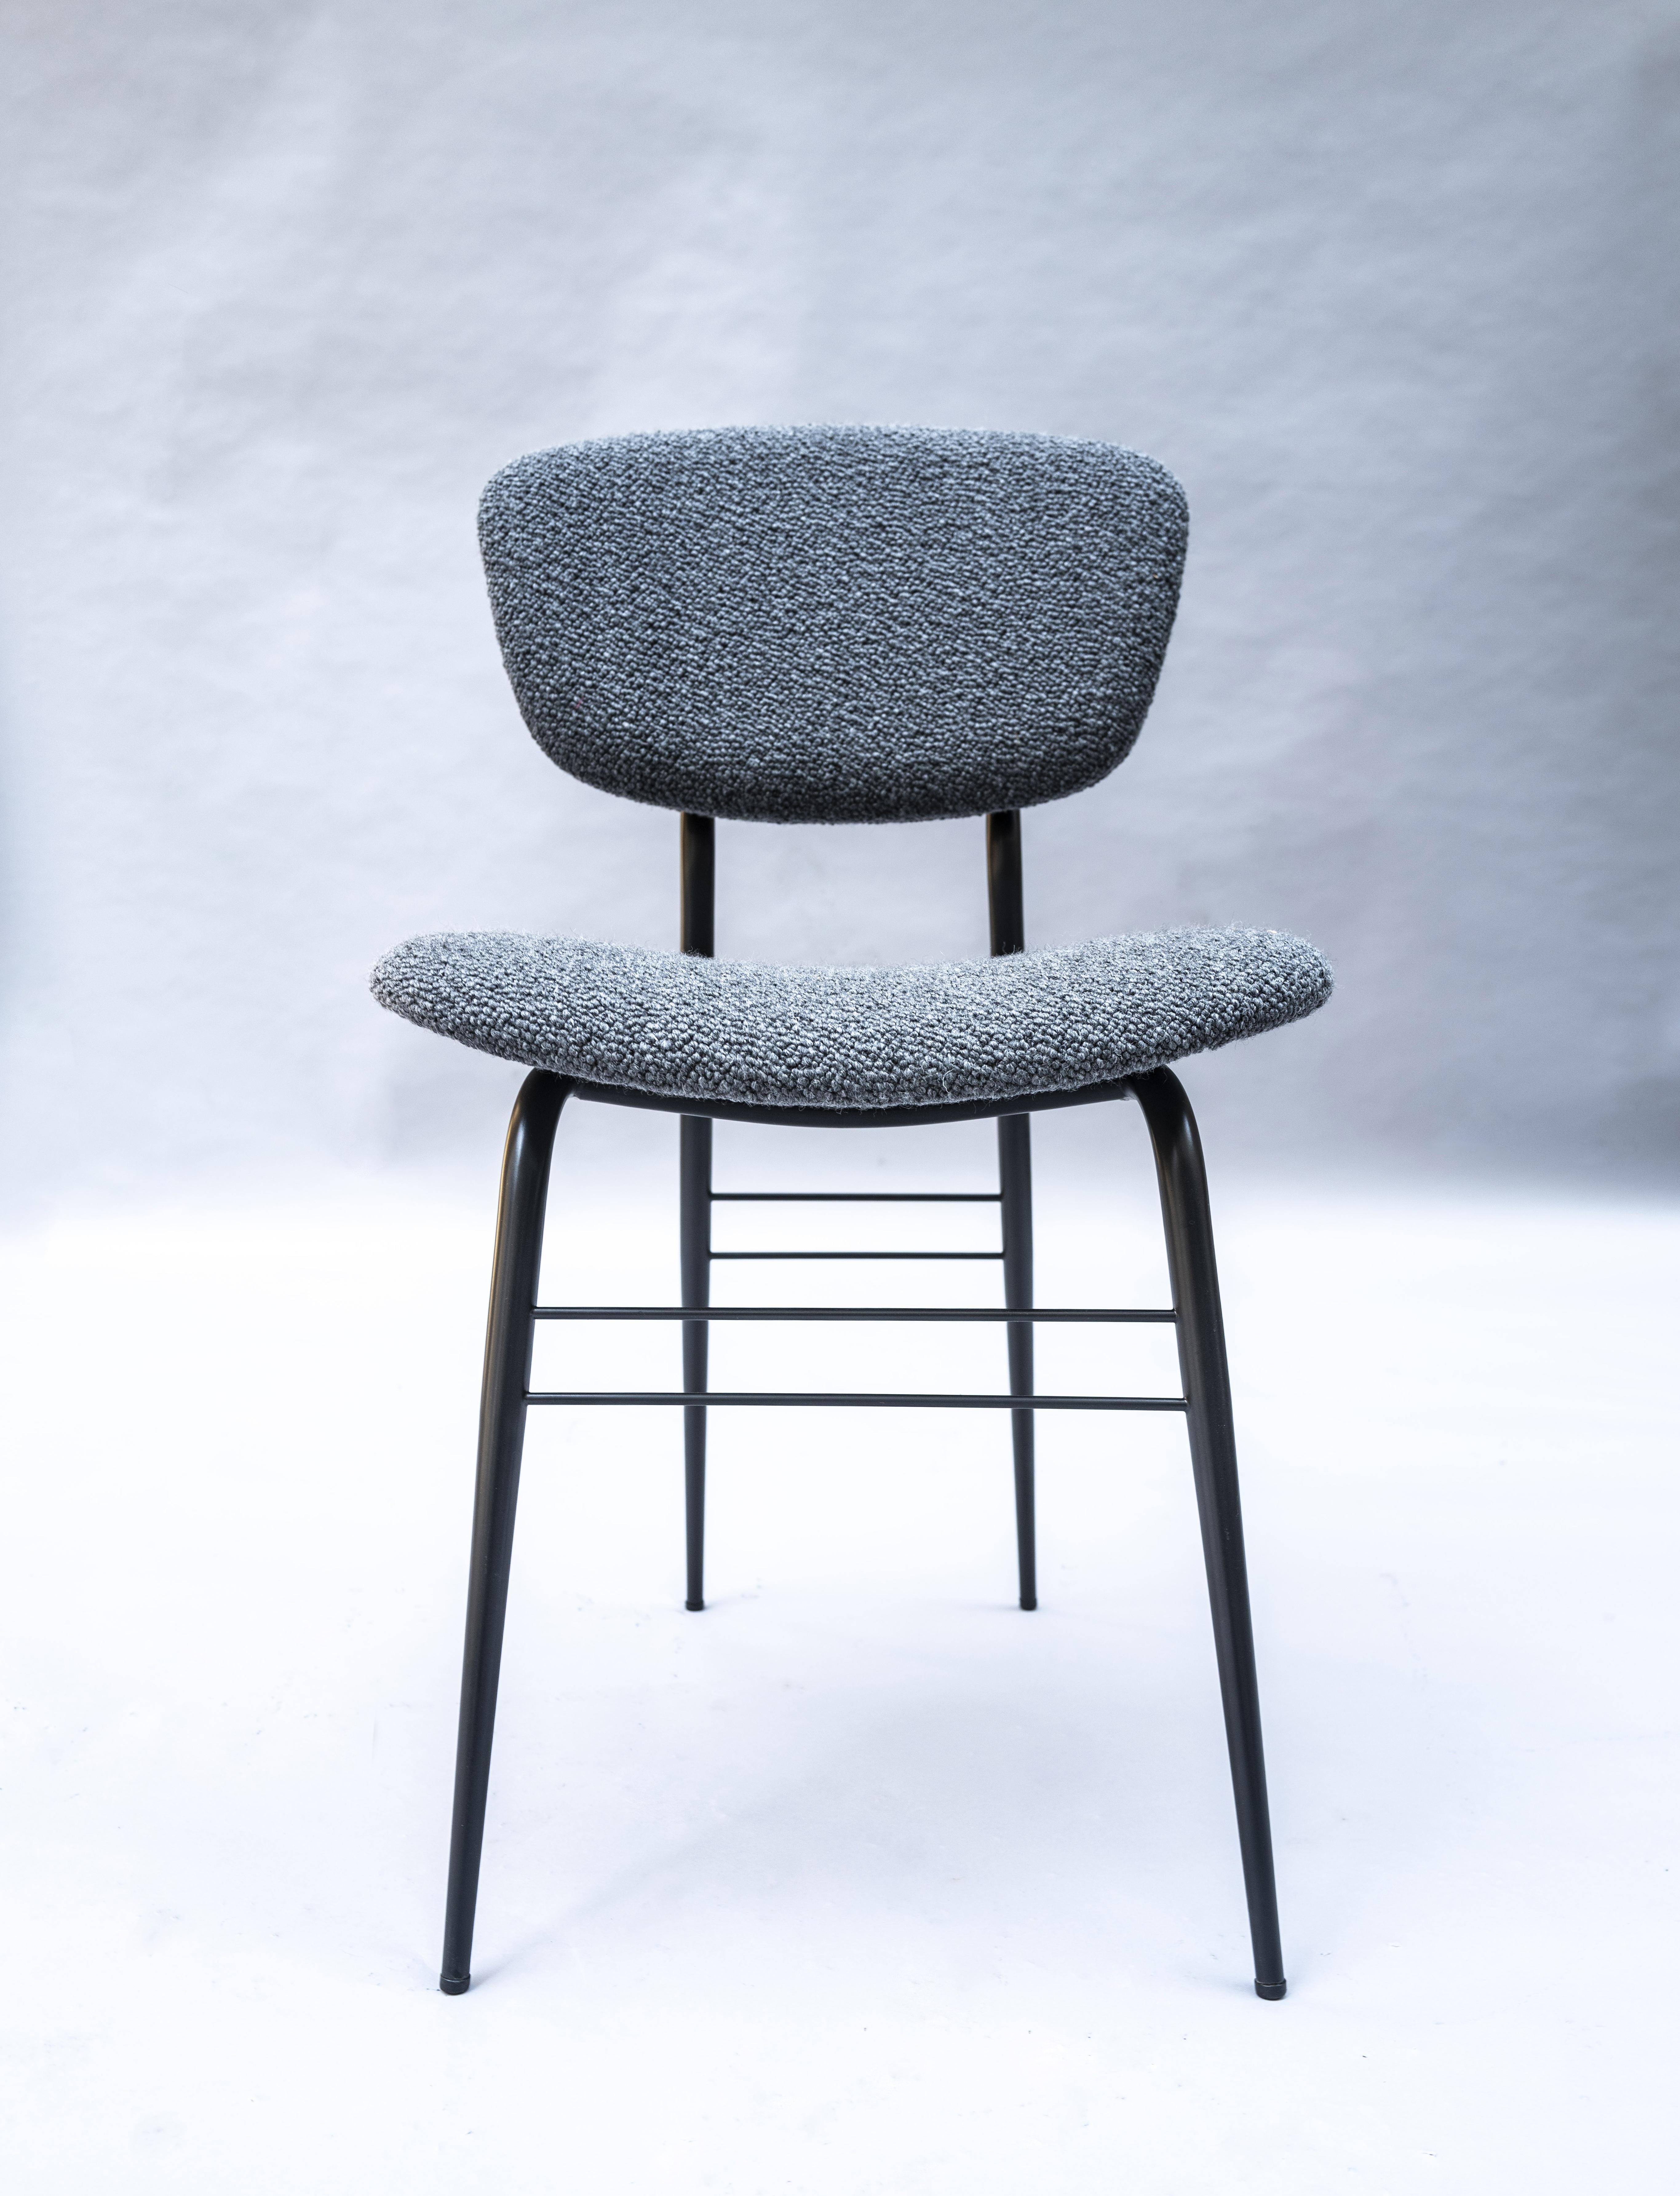 Steel Set of 6 Gastone Rinaldi Dining Chairs, Italy 1950s, in Larsen Boucle' For Sale